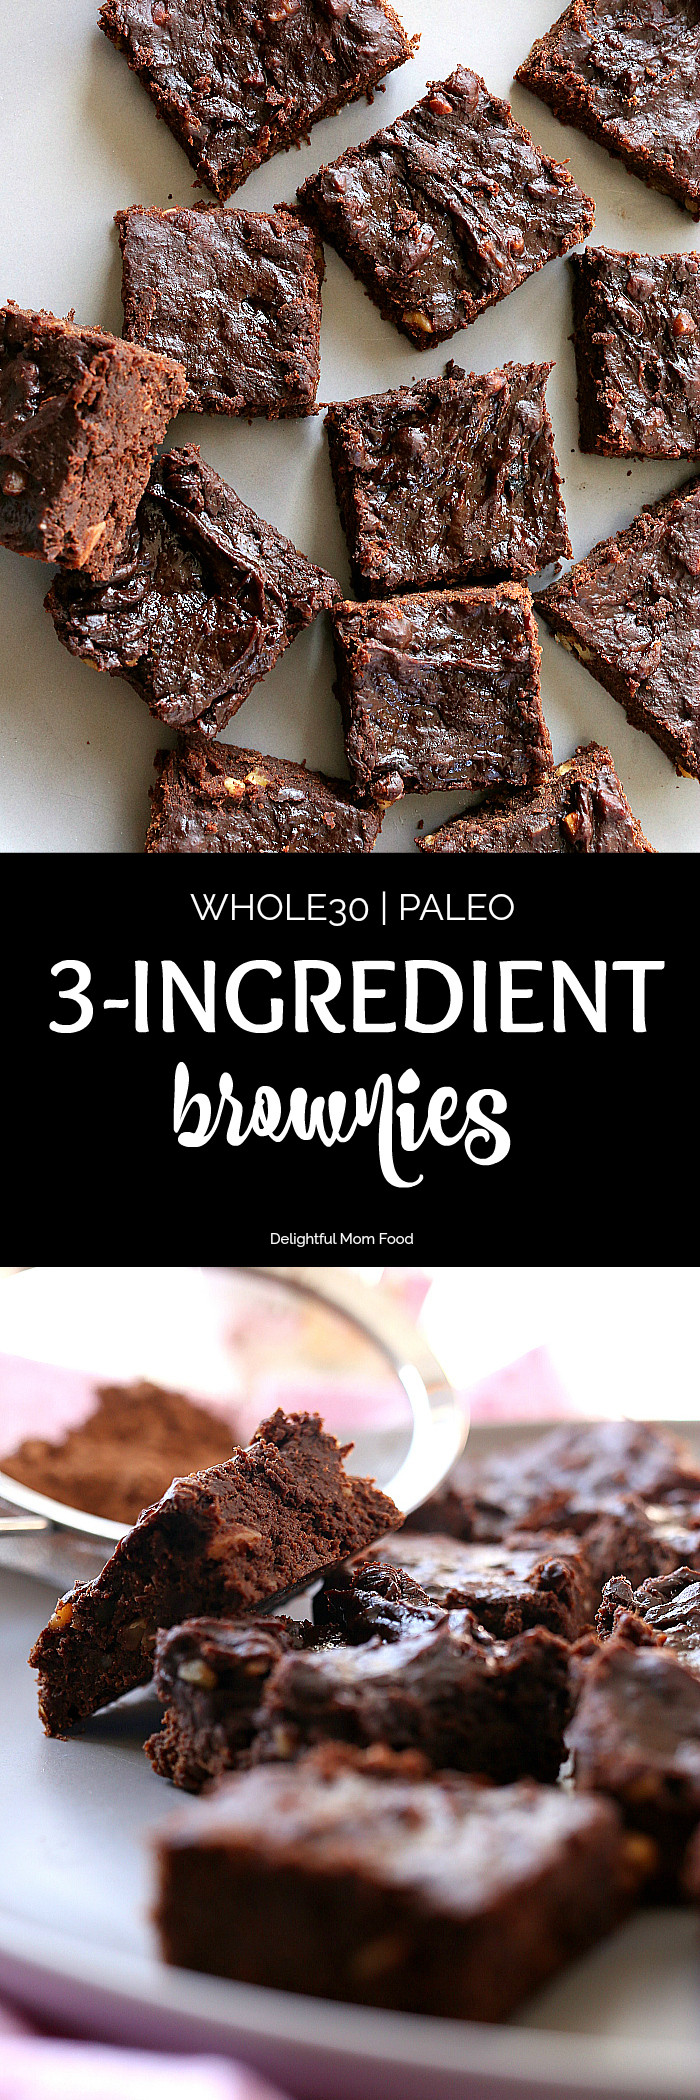 Whole30 Dessert Recipes
 3 Ingre nt Brownies Whole30 & Paleo